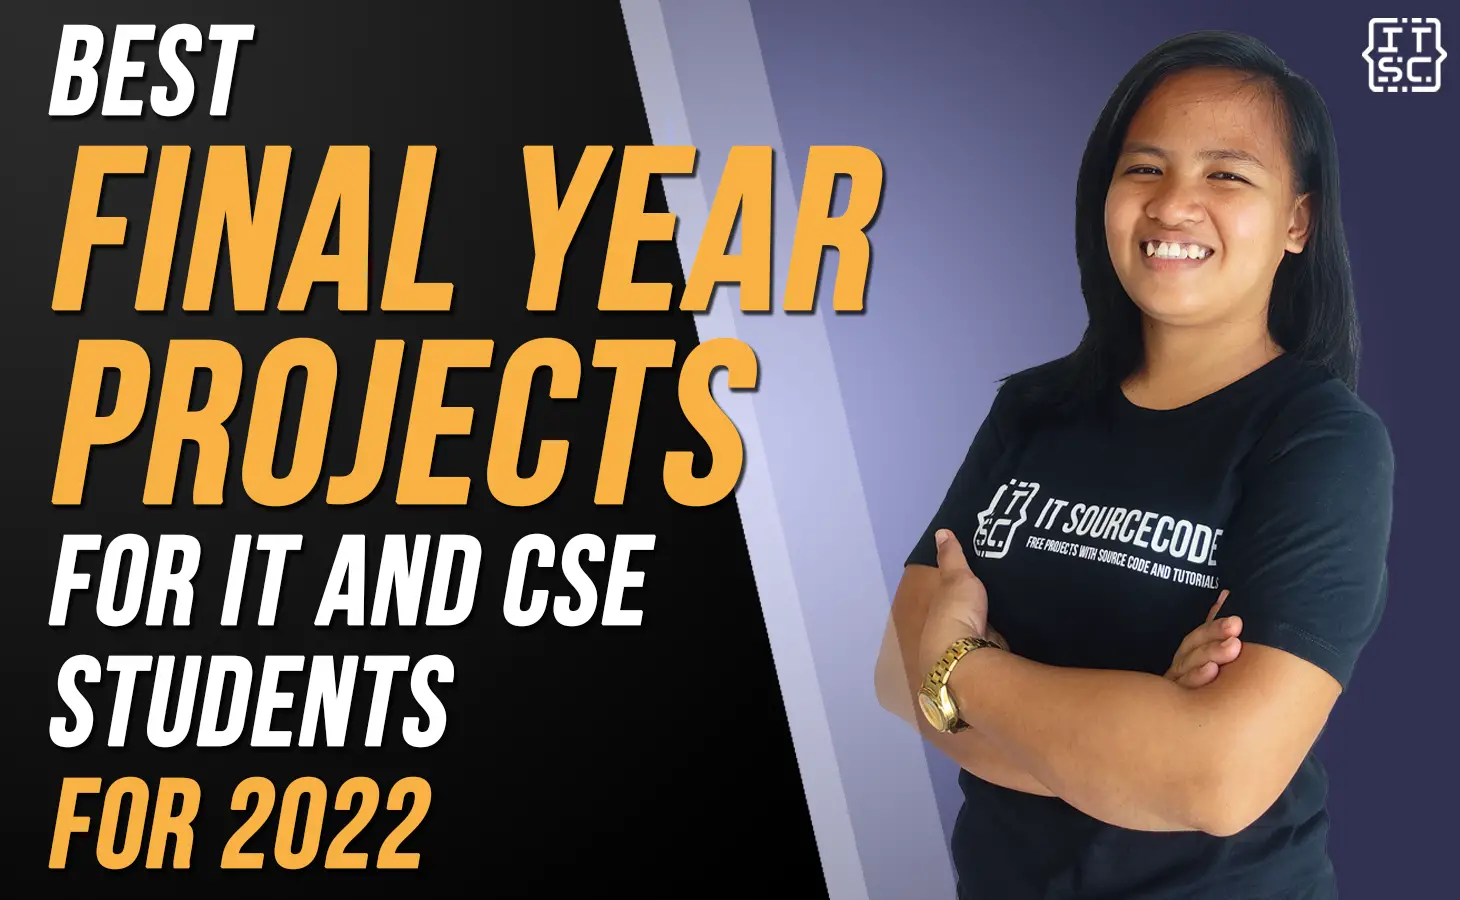 BEST FINAL YEAR PROJECTS FOR IT AND CSE FOR 2022